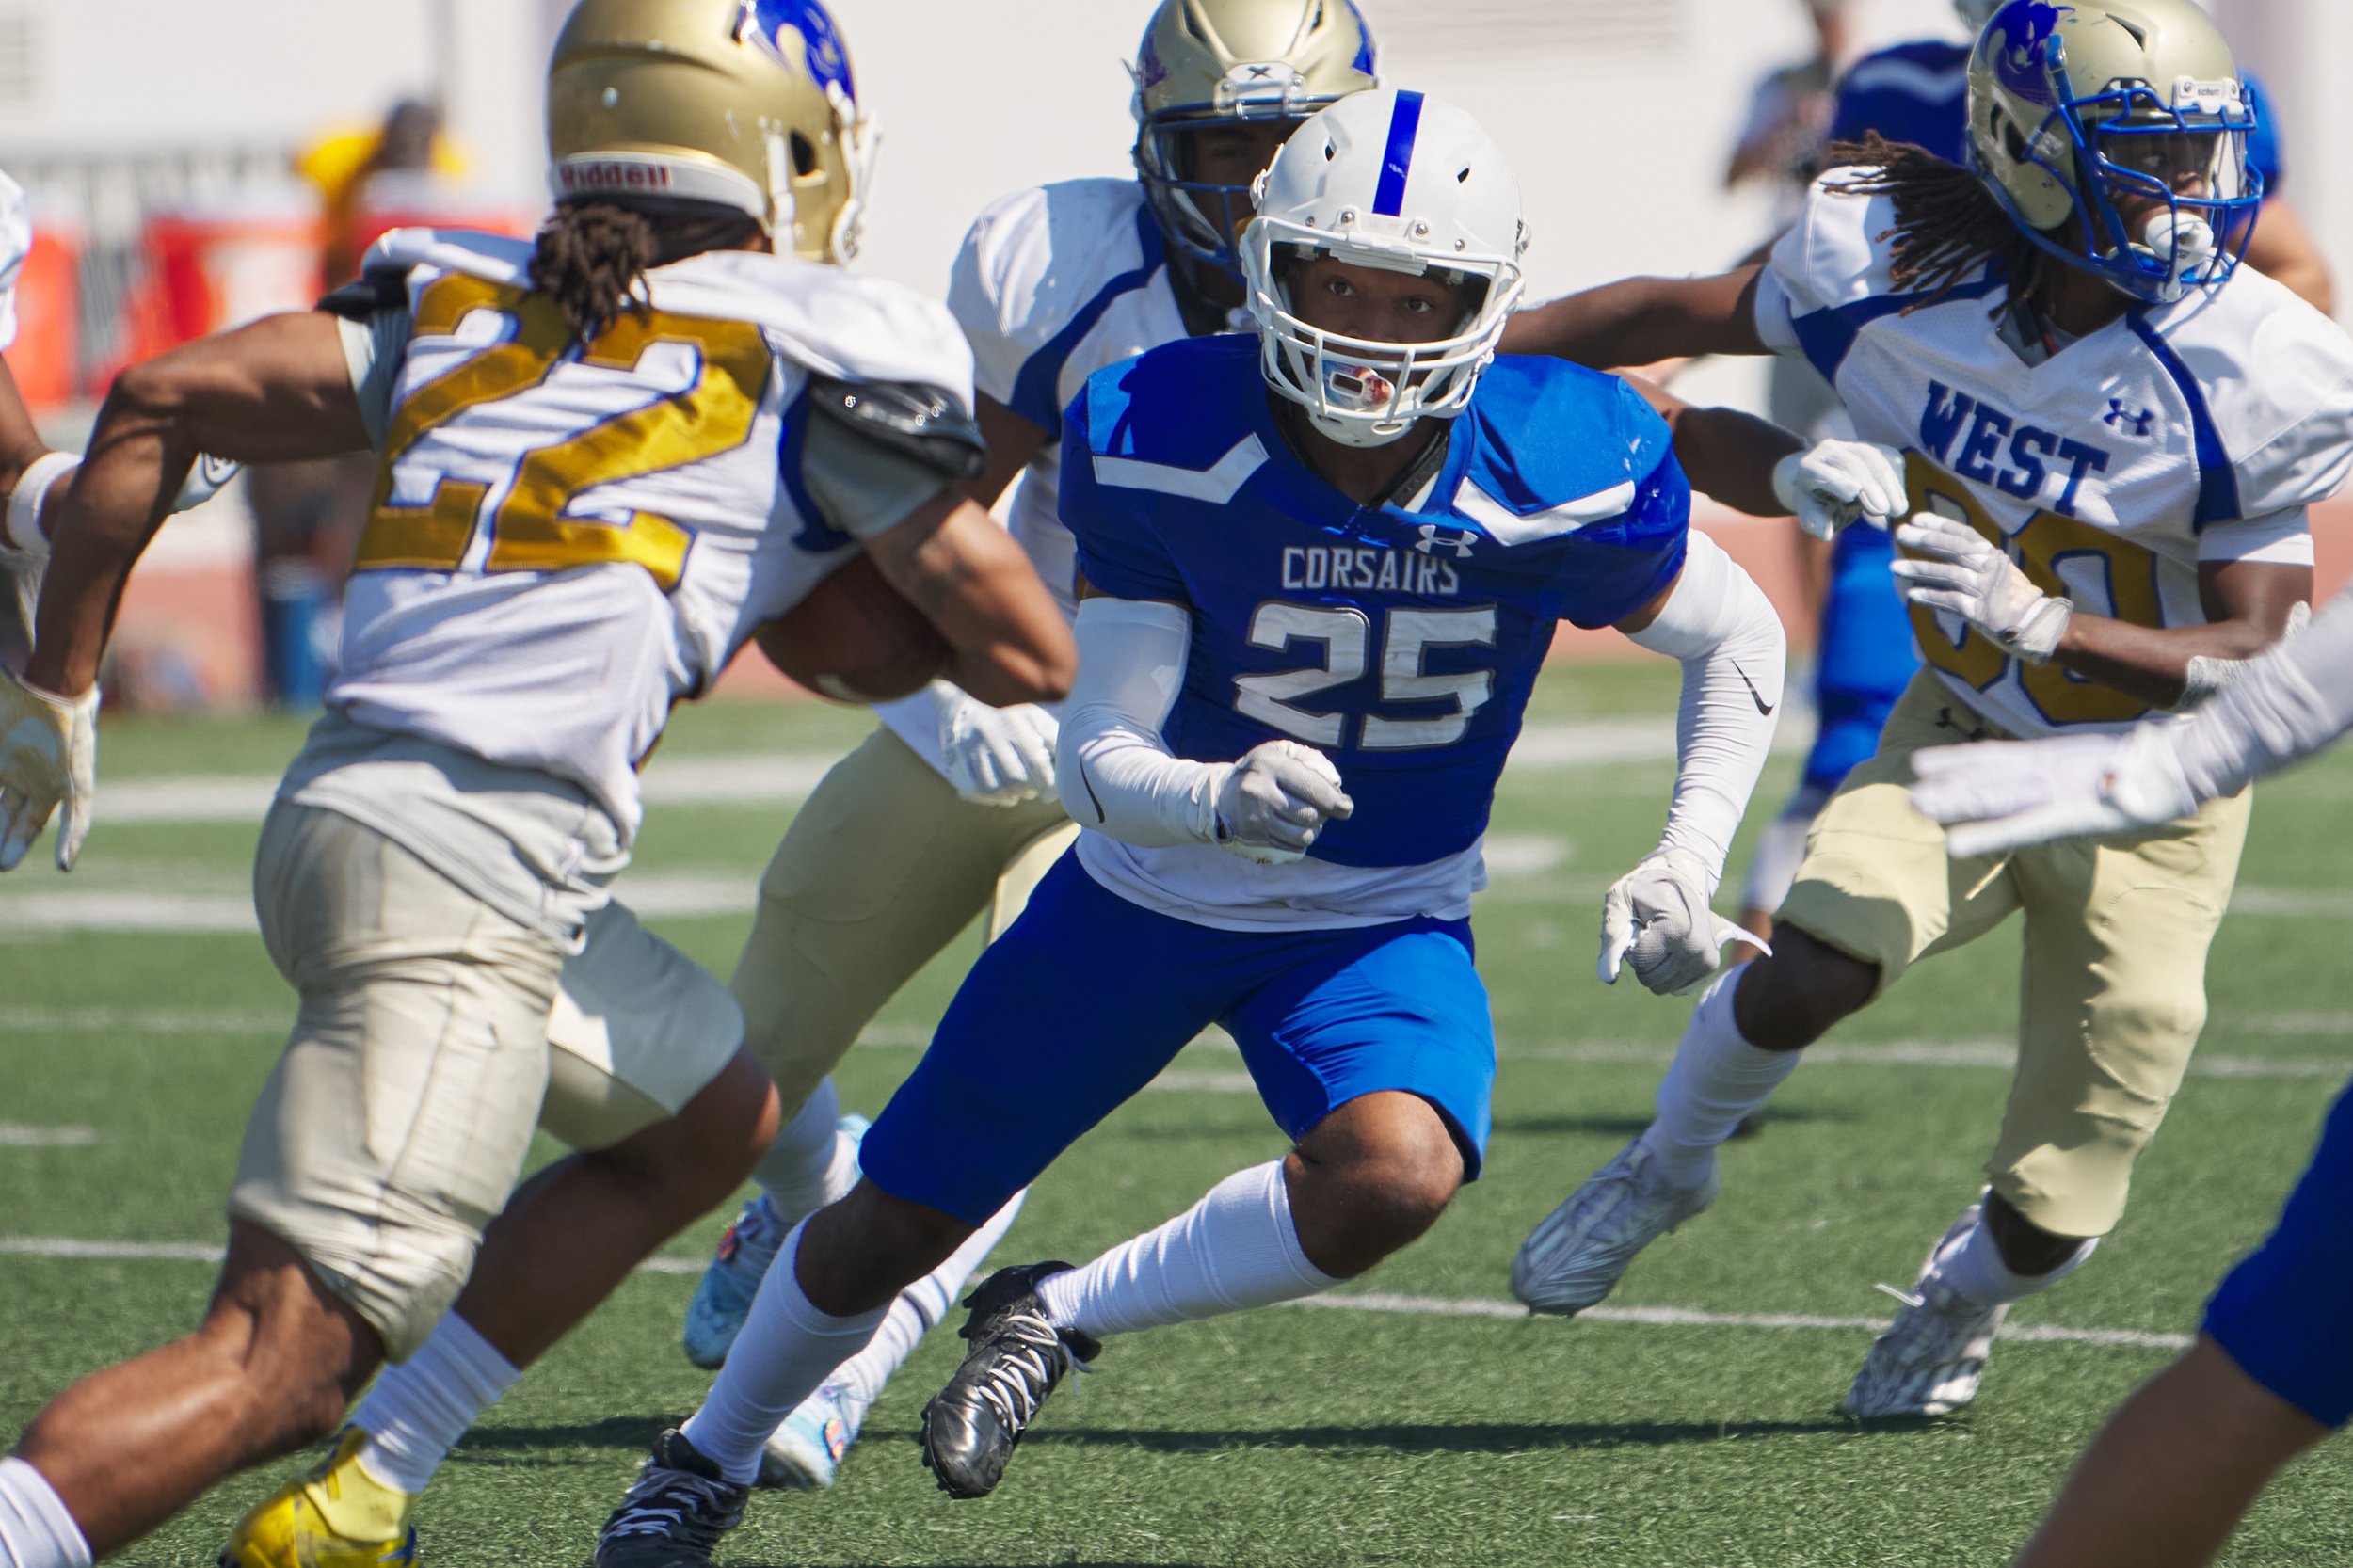  Santa Monica College Corsairs' Kwamain Ross (25) during the football match against the West Los Angeles College Wildcats on Saturday, October 1, 2022, at Corsair Field in Santa Monica, Calif. The Corsairs won 41-40. (Nicholas McCall | The Corsair) 